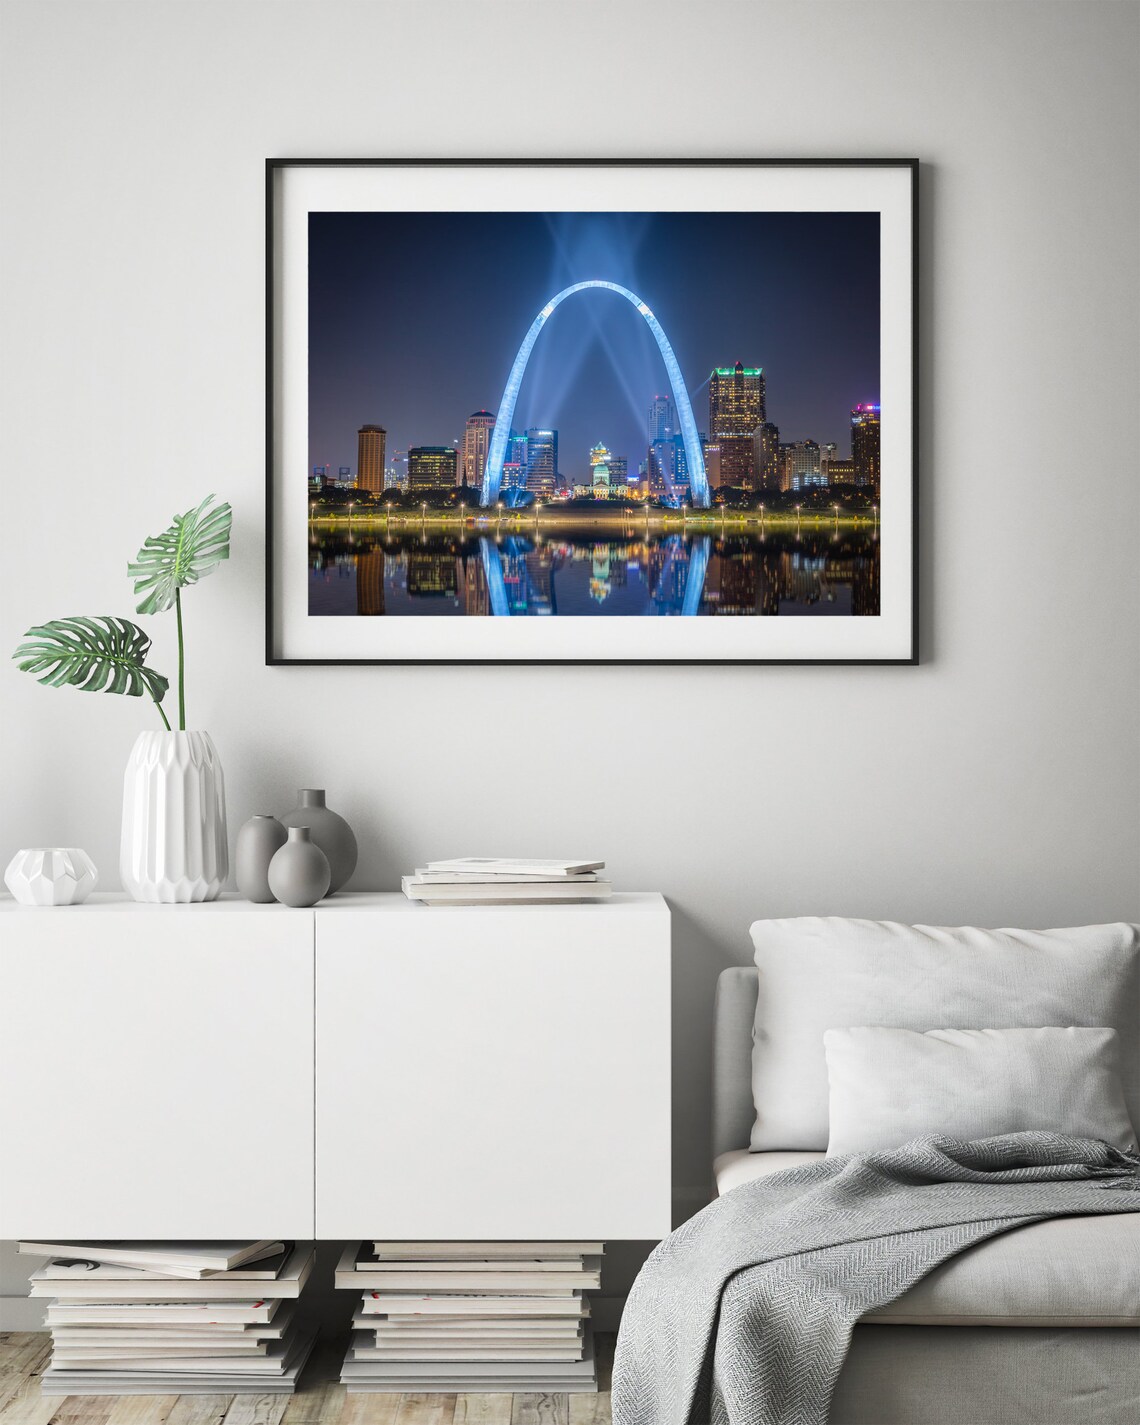 St Louis Wall Art of Gateway Arch Downtown Skyline at Night - Etsy